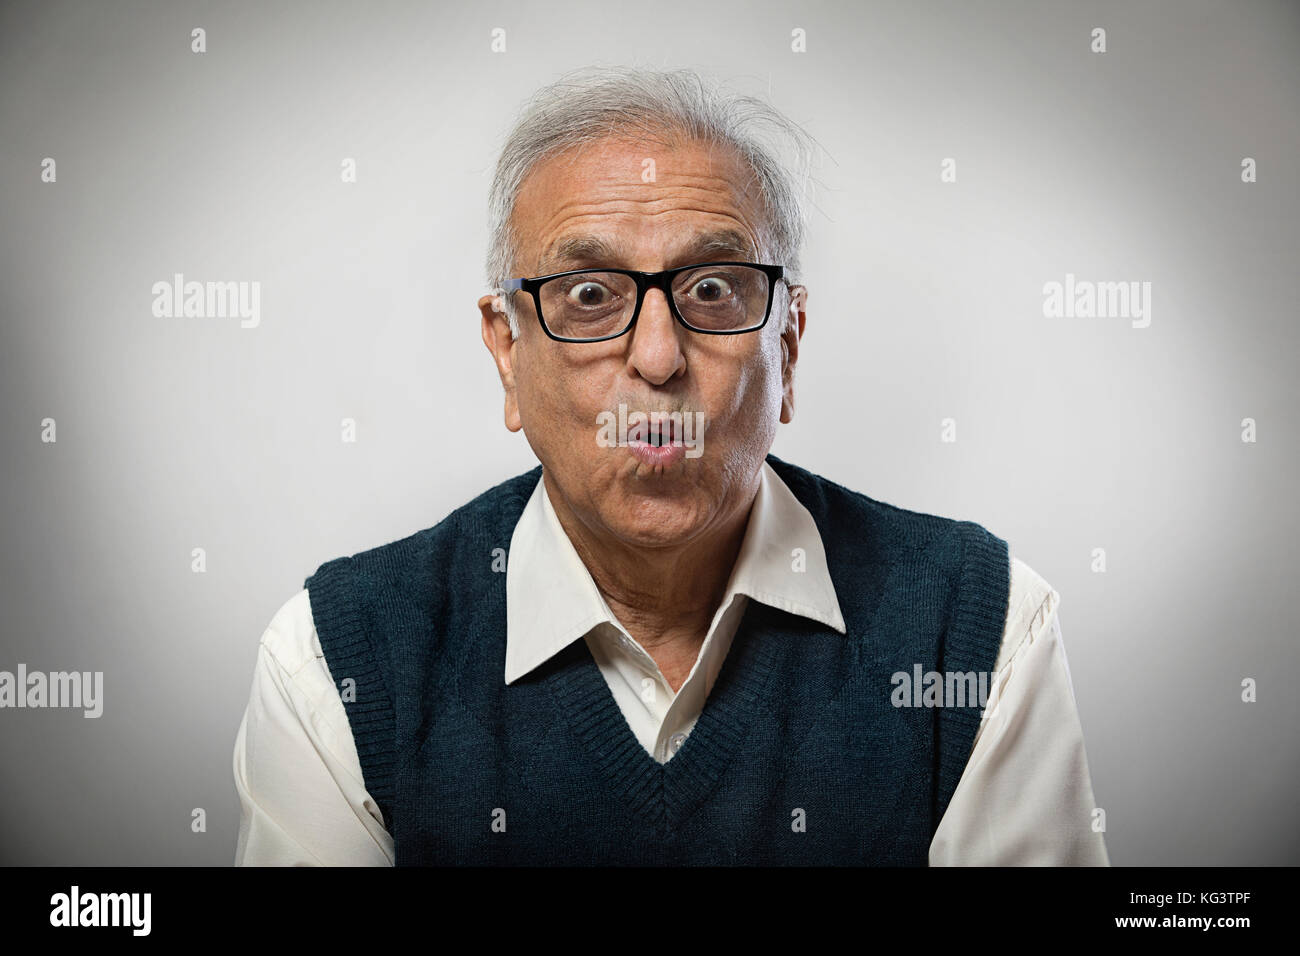 Senior man wearing spectacles making funny face Stock Photo